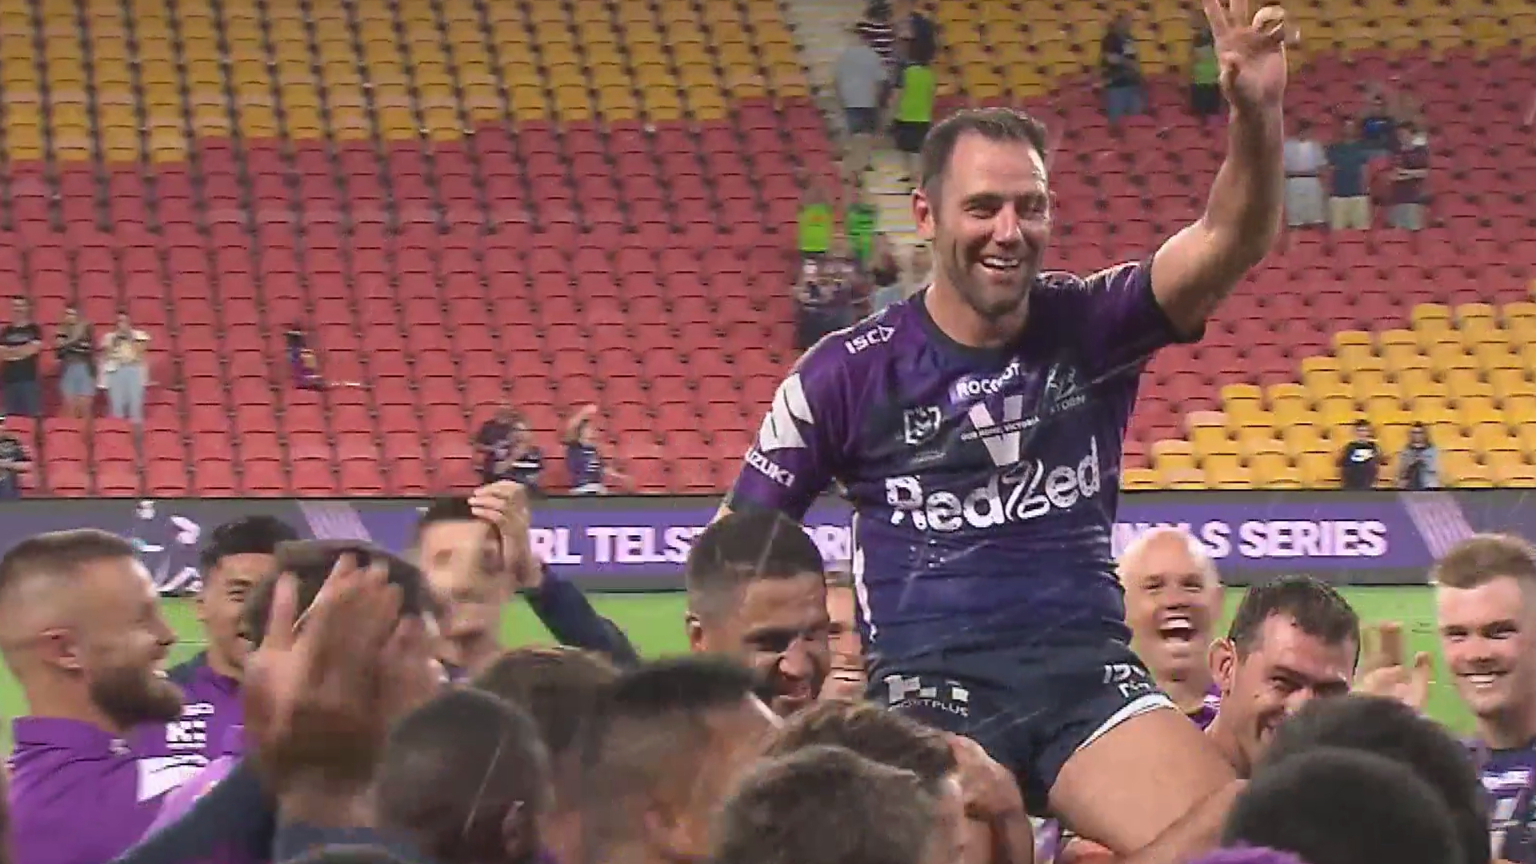 Cameron Smith retires from rugby league